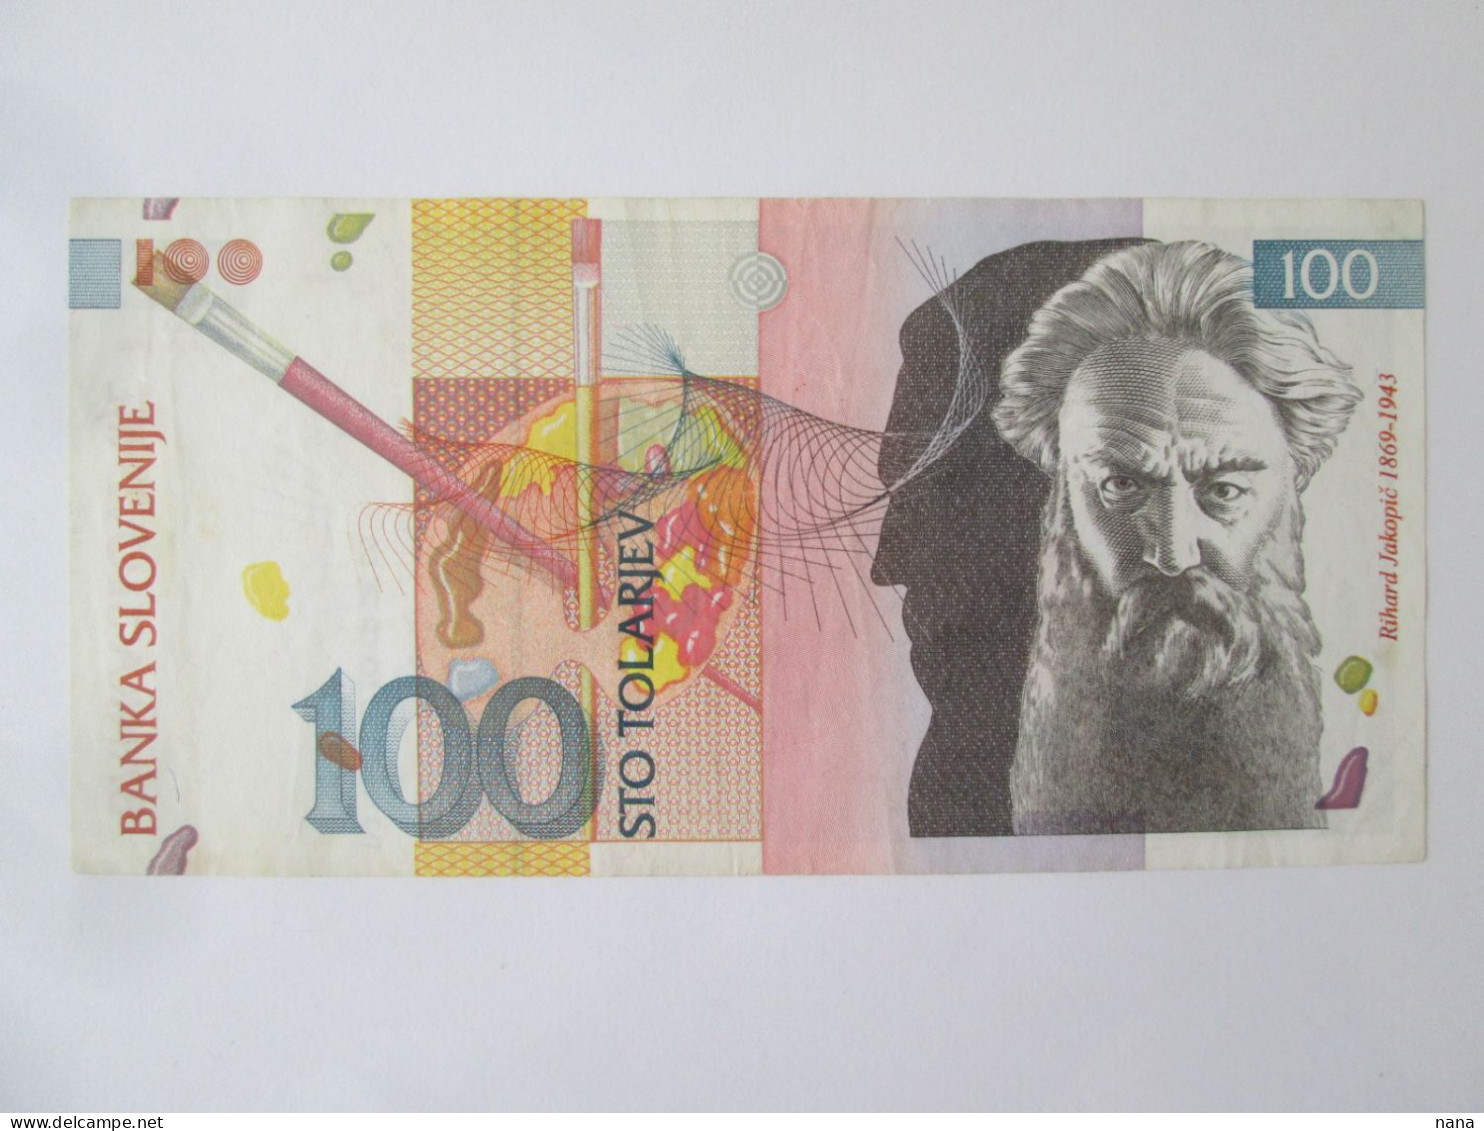 Slovenia 100 Tolarjev 1992 Banknote Very Good Condition See Pictures - Slovenia